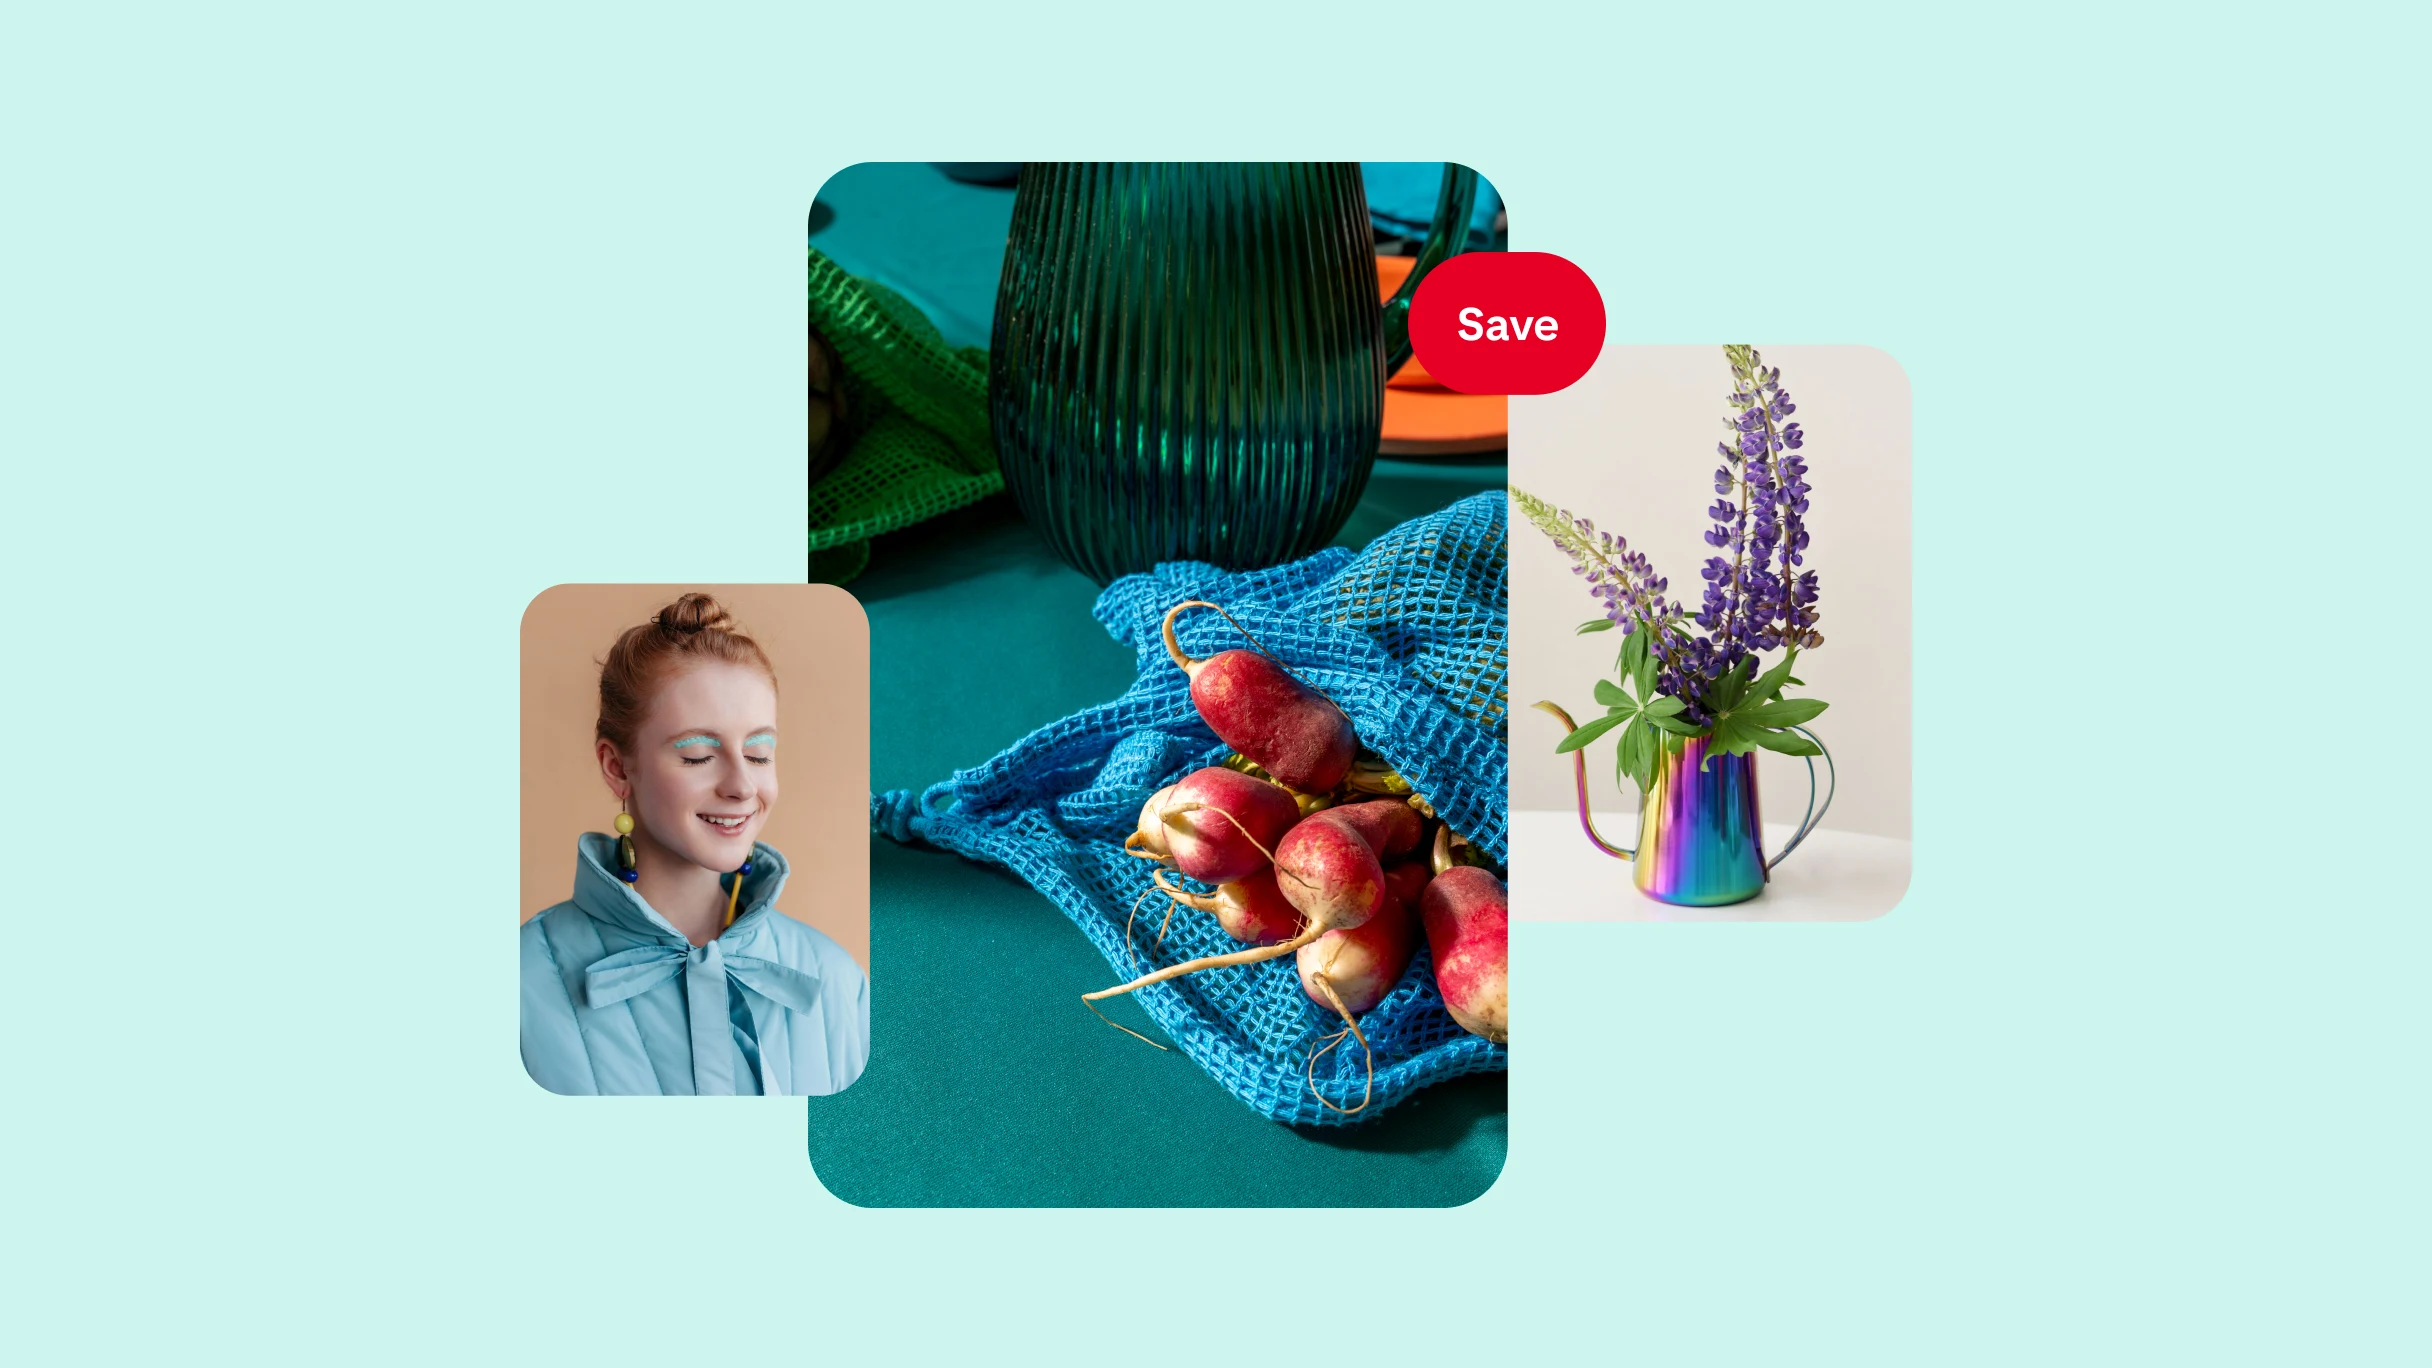 On a teal background, a collage of three images. To the left, a red-haired woman with blue eyeshadow and jacket. In the middle, a table with radishes and a water pitcher in the background. To the right, a bunch of purple flowers in a technicolor vase. 